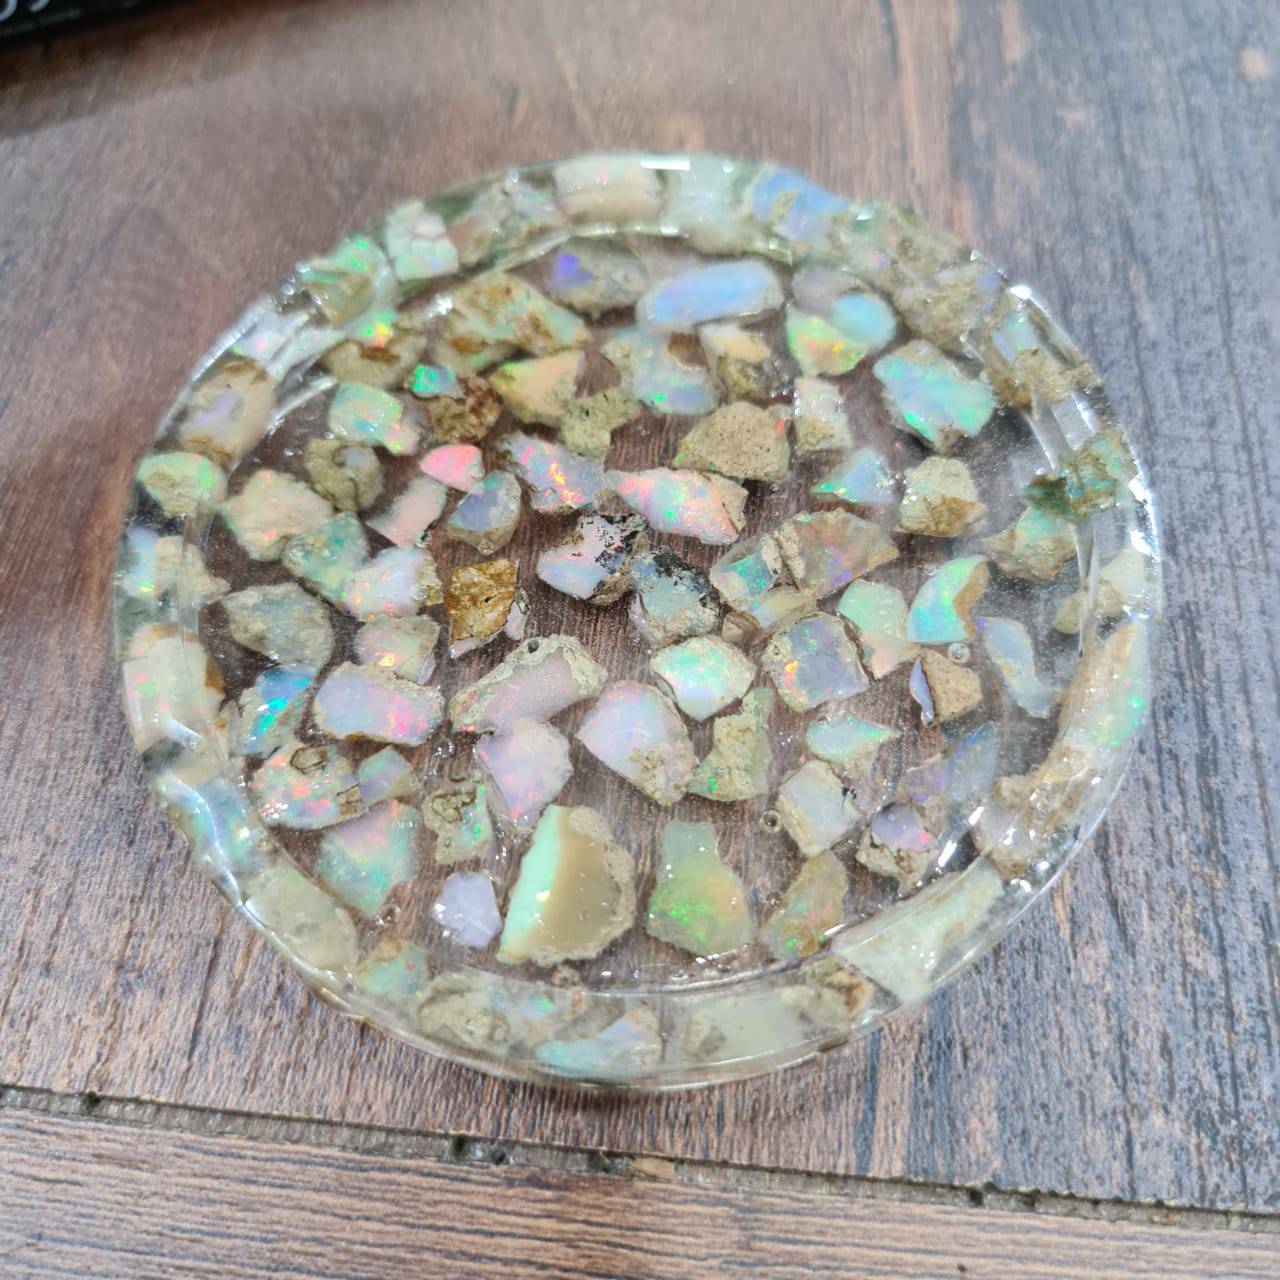 Natural Opal Round Tray | Resin Polished Coaster with Natural Opals Roughs |2.5 Inches - The LabradoriteKing